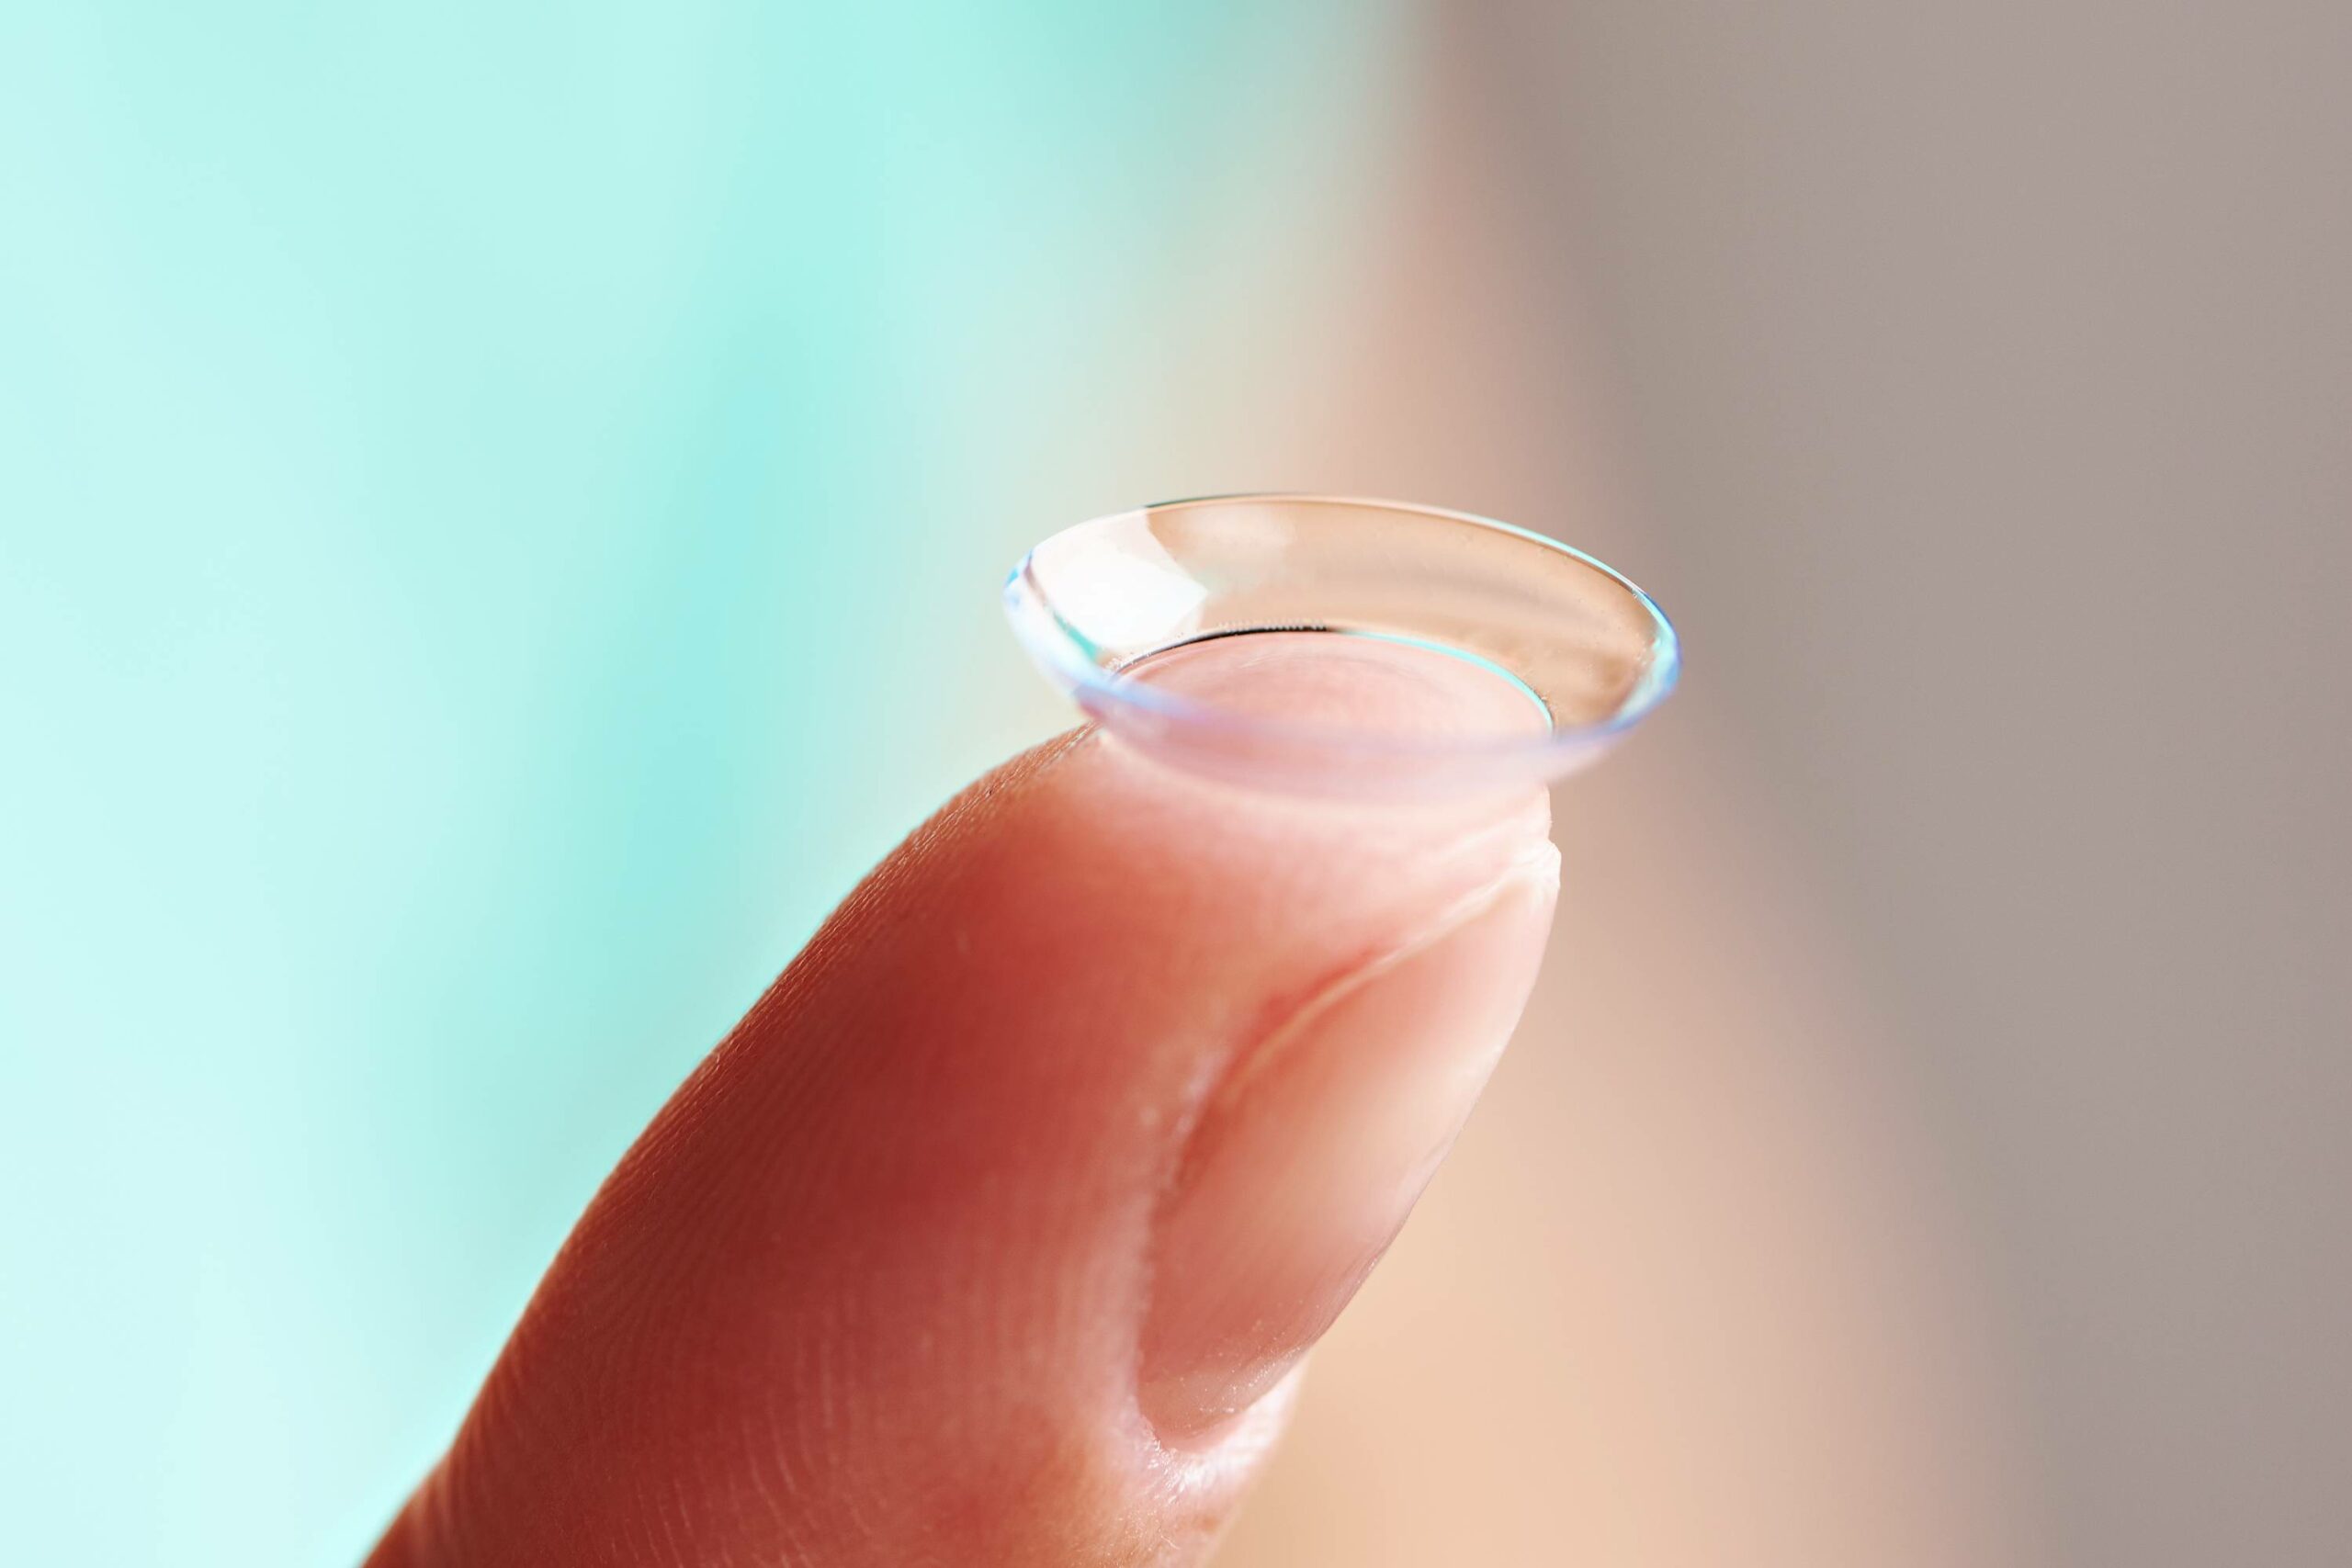 finger holding contact lens